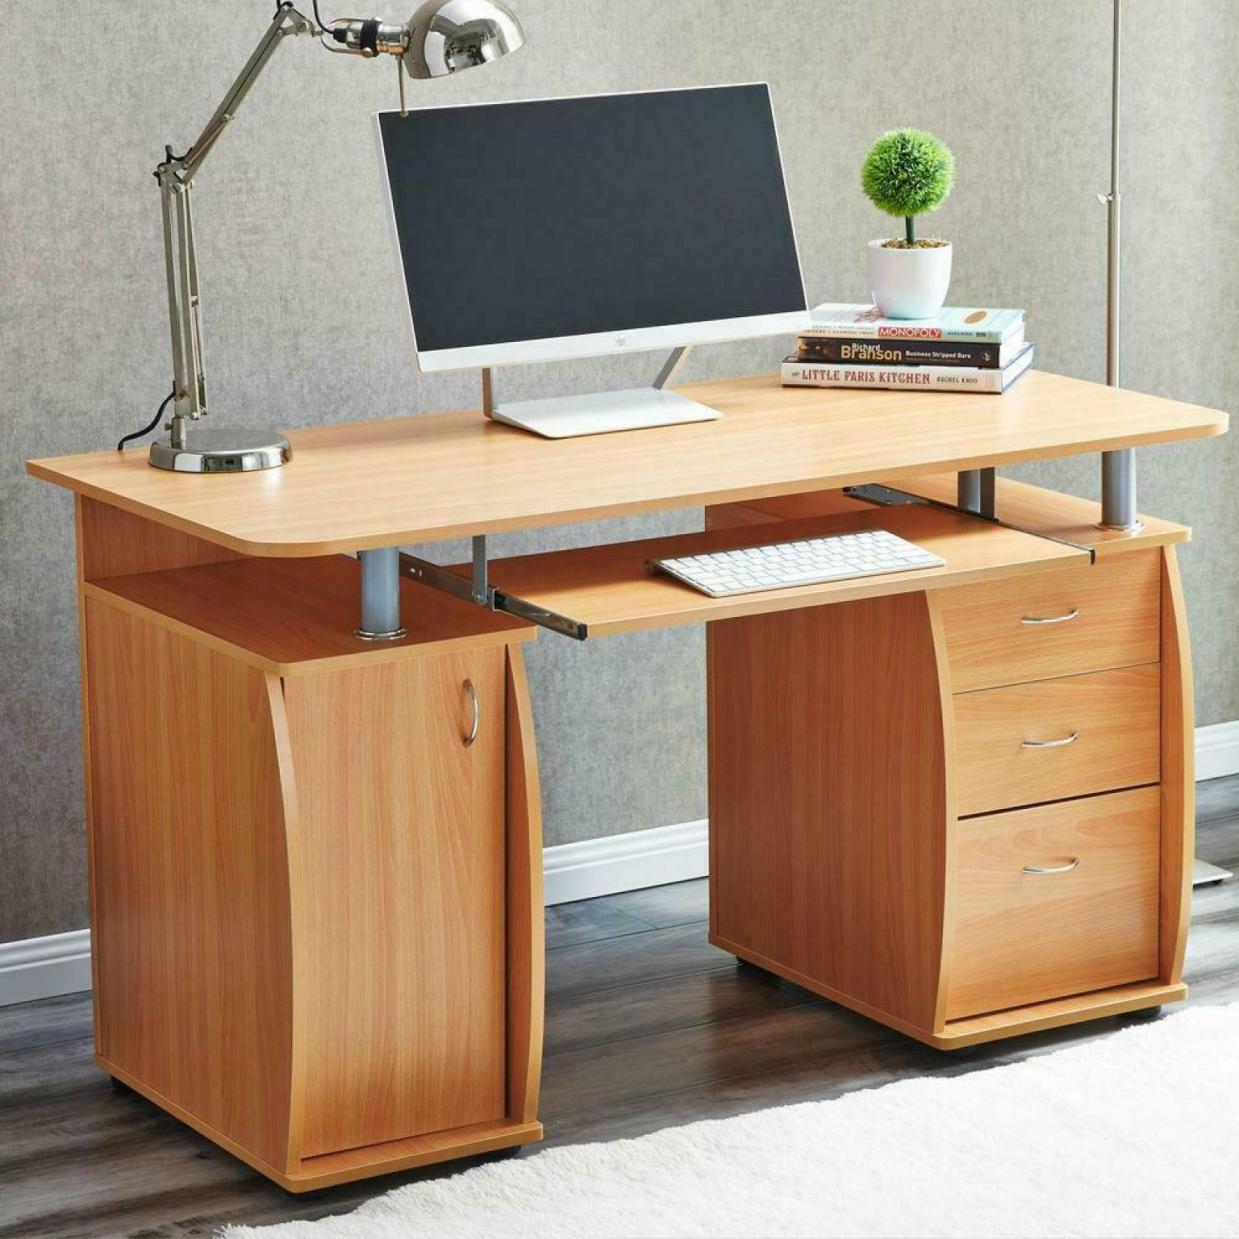 What Are the Long-Term Benefits of Using a Standing Desk?